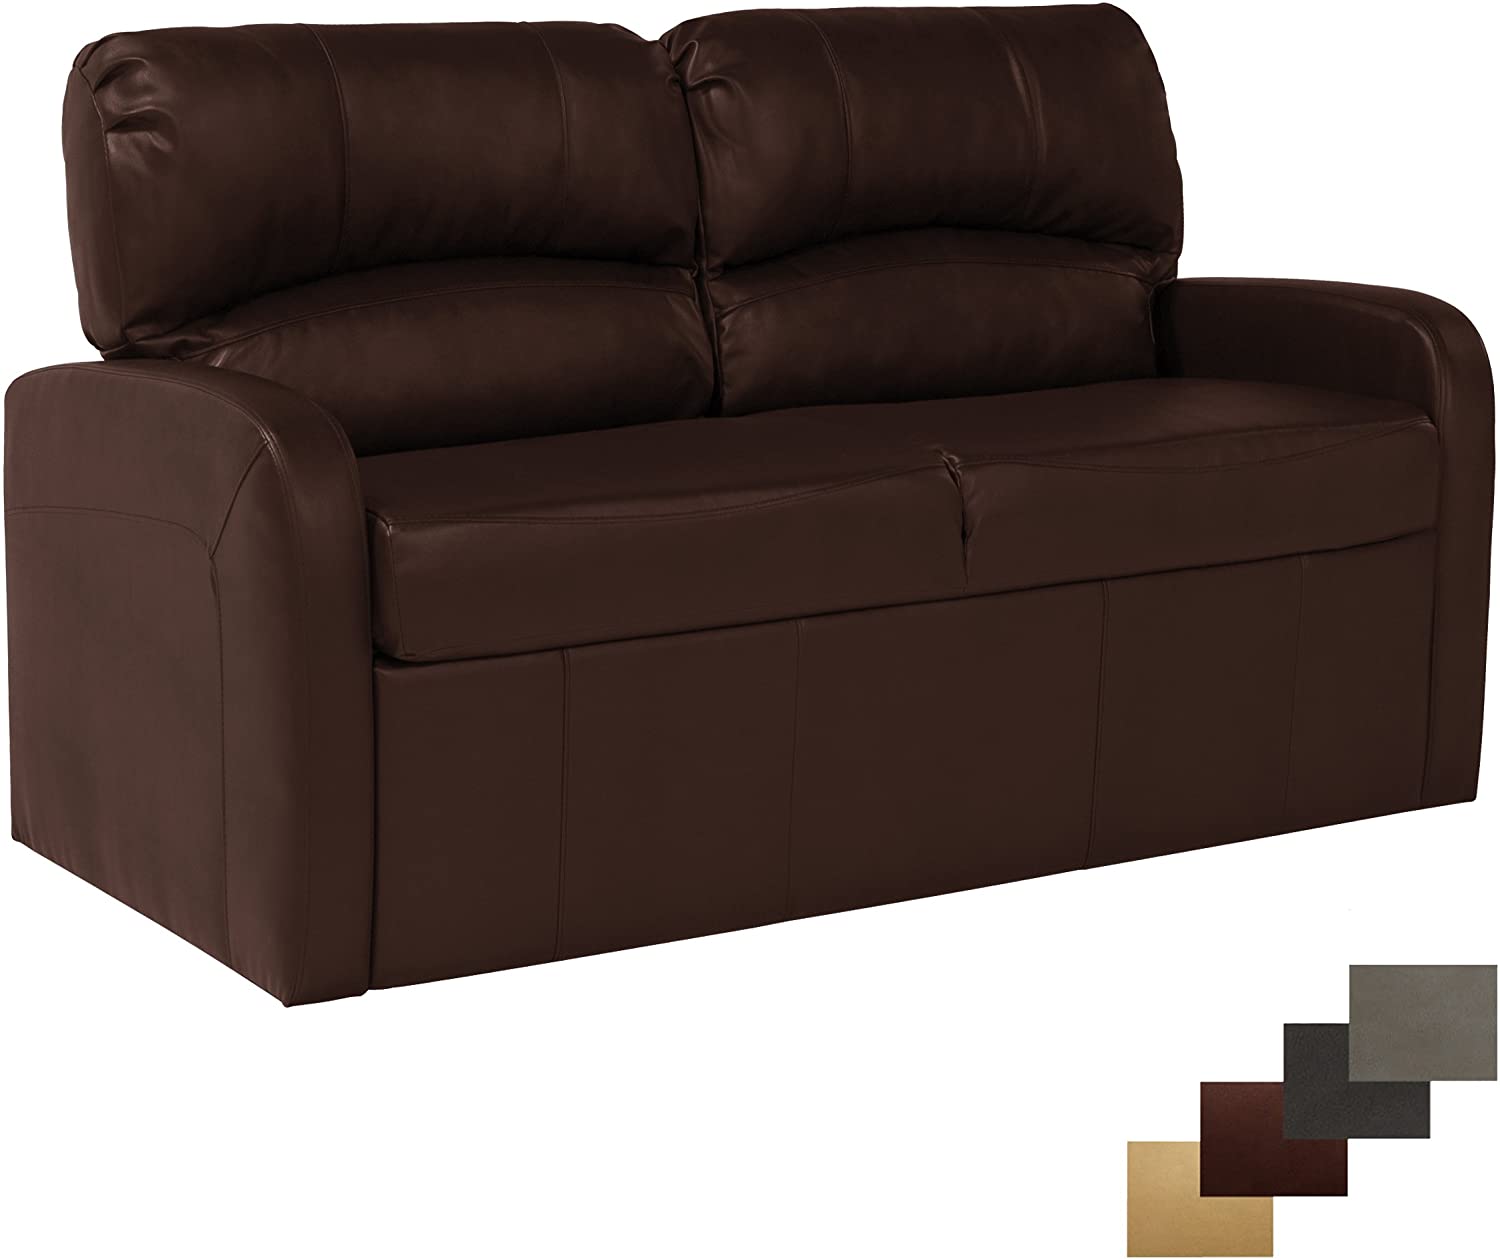 RecPro Living Room Couch Slideout Furniture